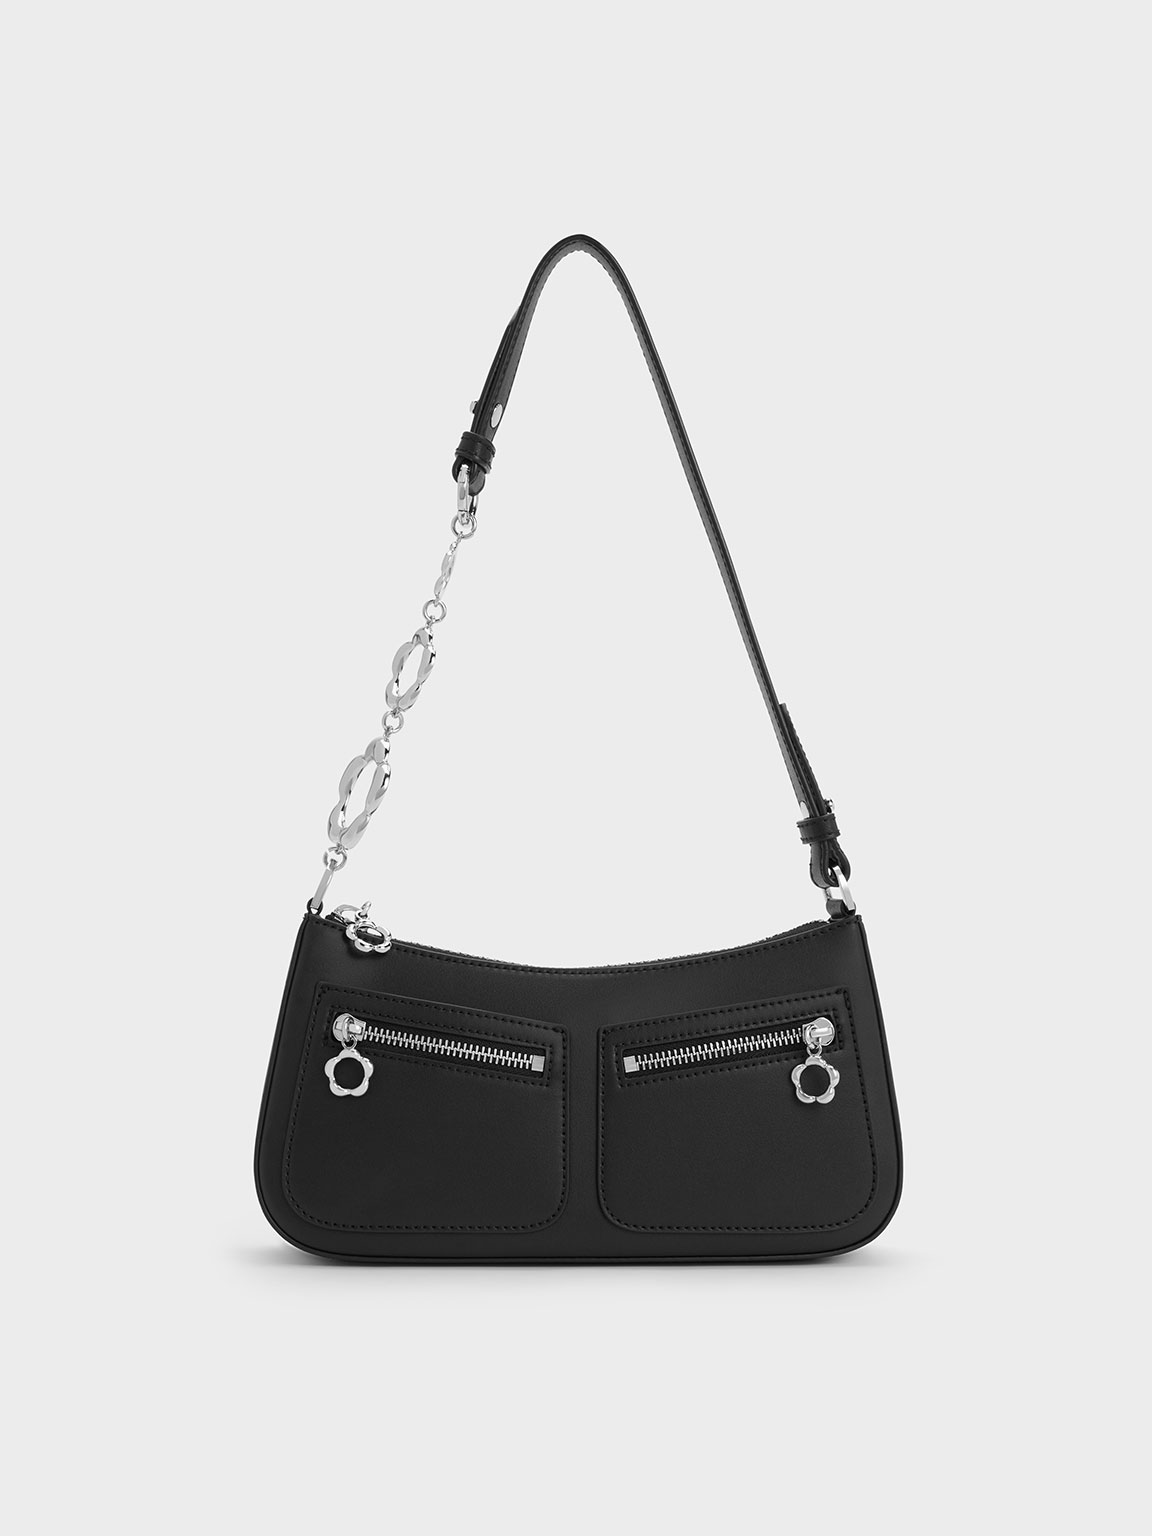 Black LEATHER Saddle Side Bags WOMEN Contrast SHOULDER BAGs Small Crossbody  Purse FOR WOMEN | Purses crossbody, Small crossbody purse, Side bags